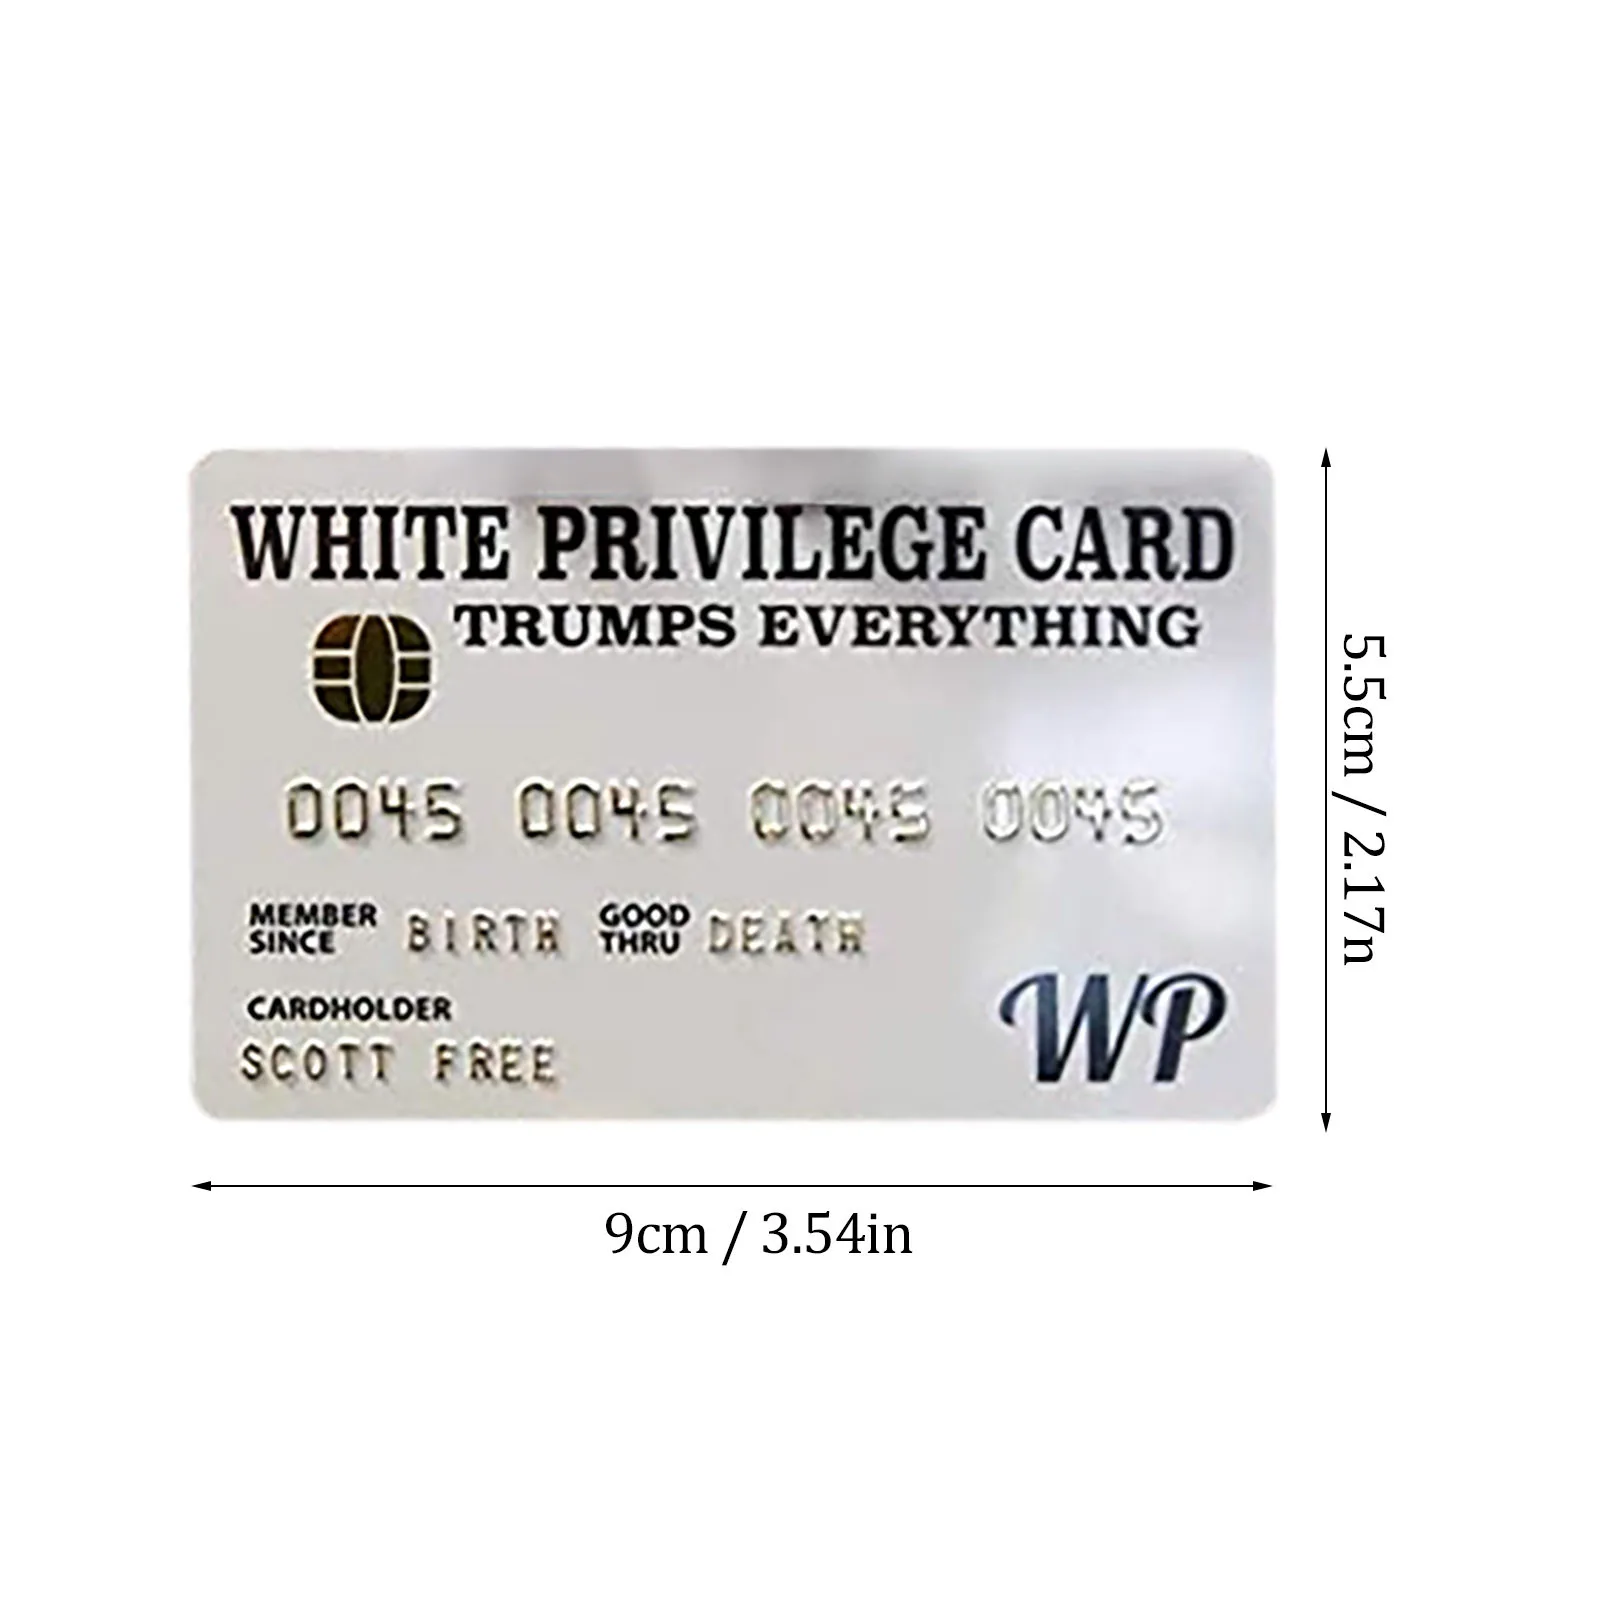 Celendi White Privilege Card Trumps Everything Jokes Men and Women Give Gifts to Each Other Funny Card